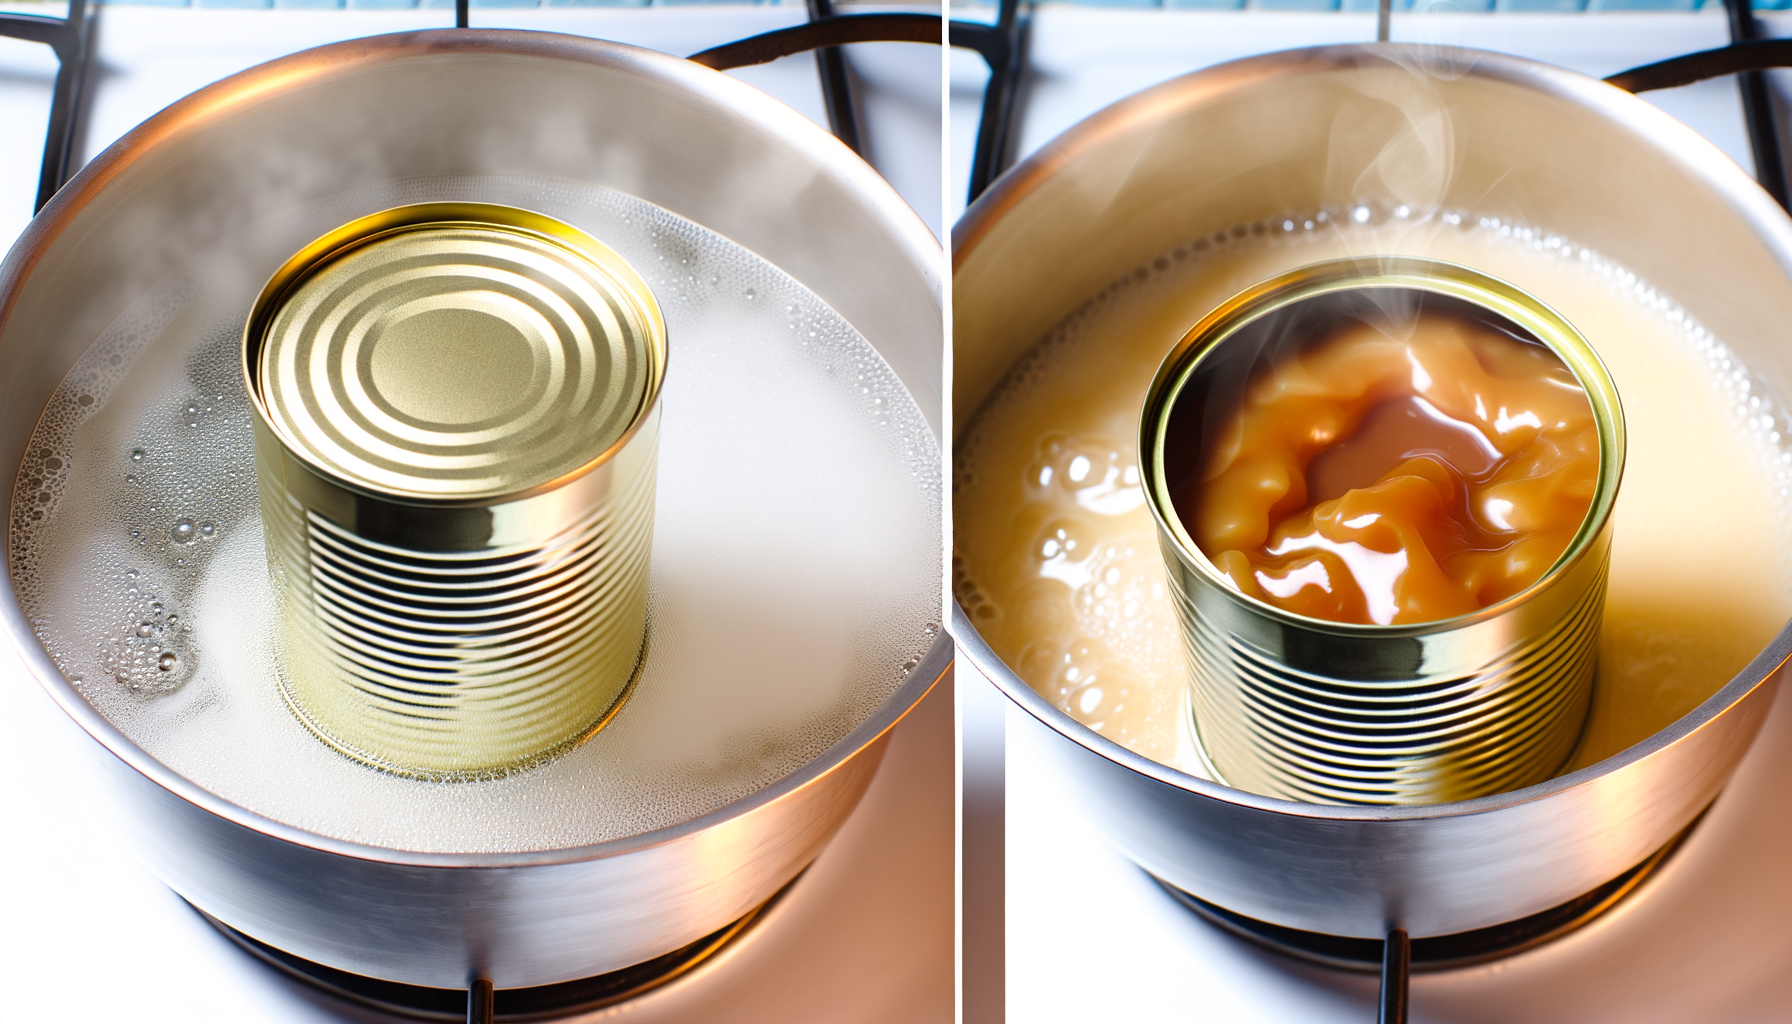 Realistic depiction of a can submerged in a pot of water on a stove and an open can filled with creamy caramel Dulce de Leche.